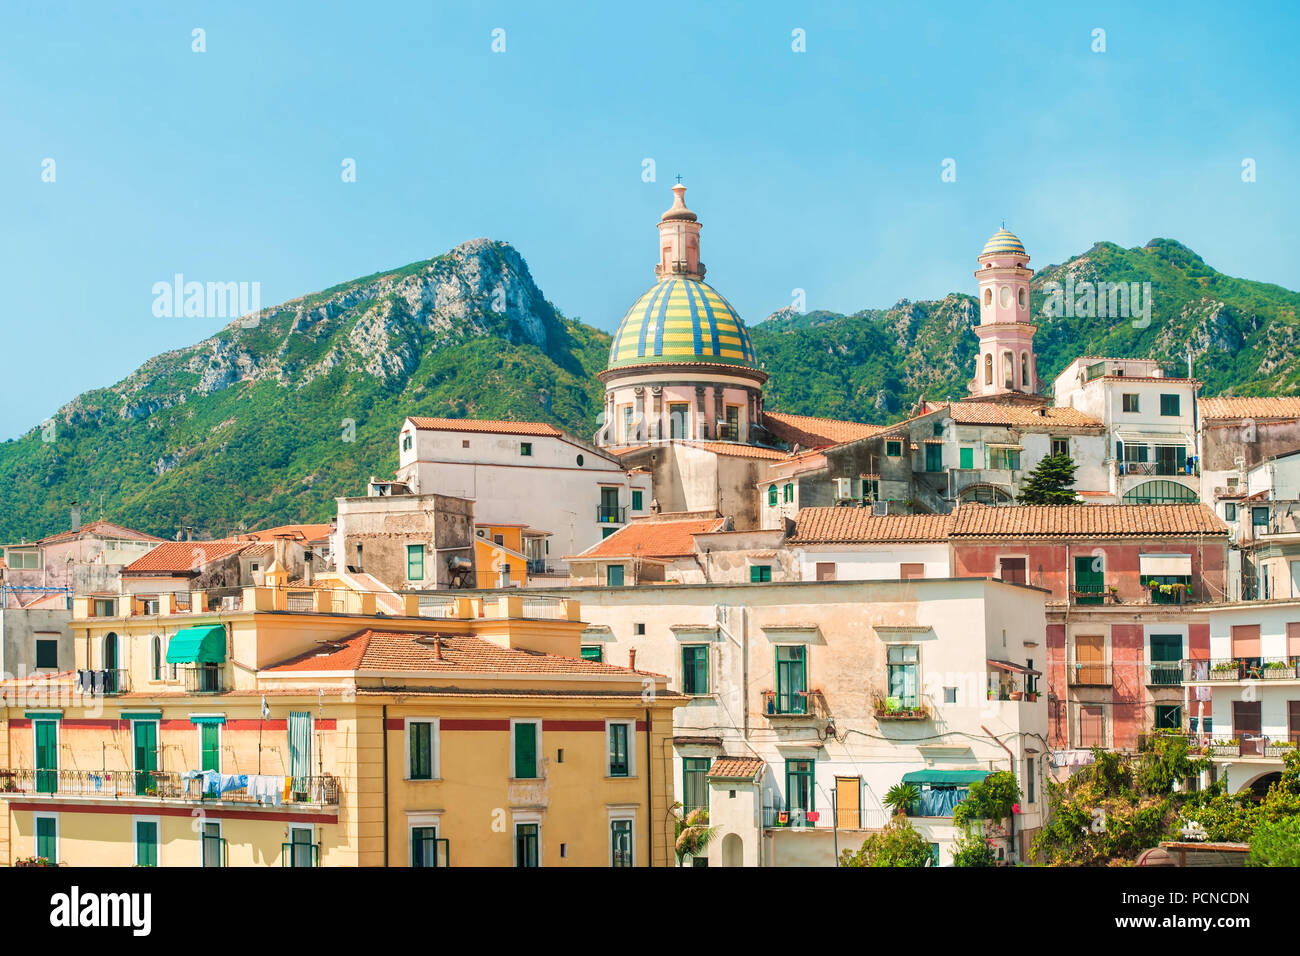 view of small Italian town in morning with beautiful Parrocchia San Giovanni church and mountains in background, Vietri Sul Mare, Salerno, Campania, I Stock Photo